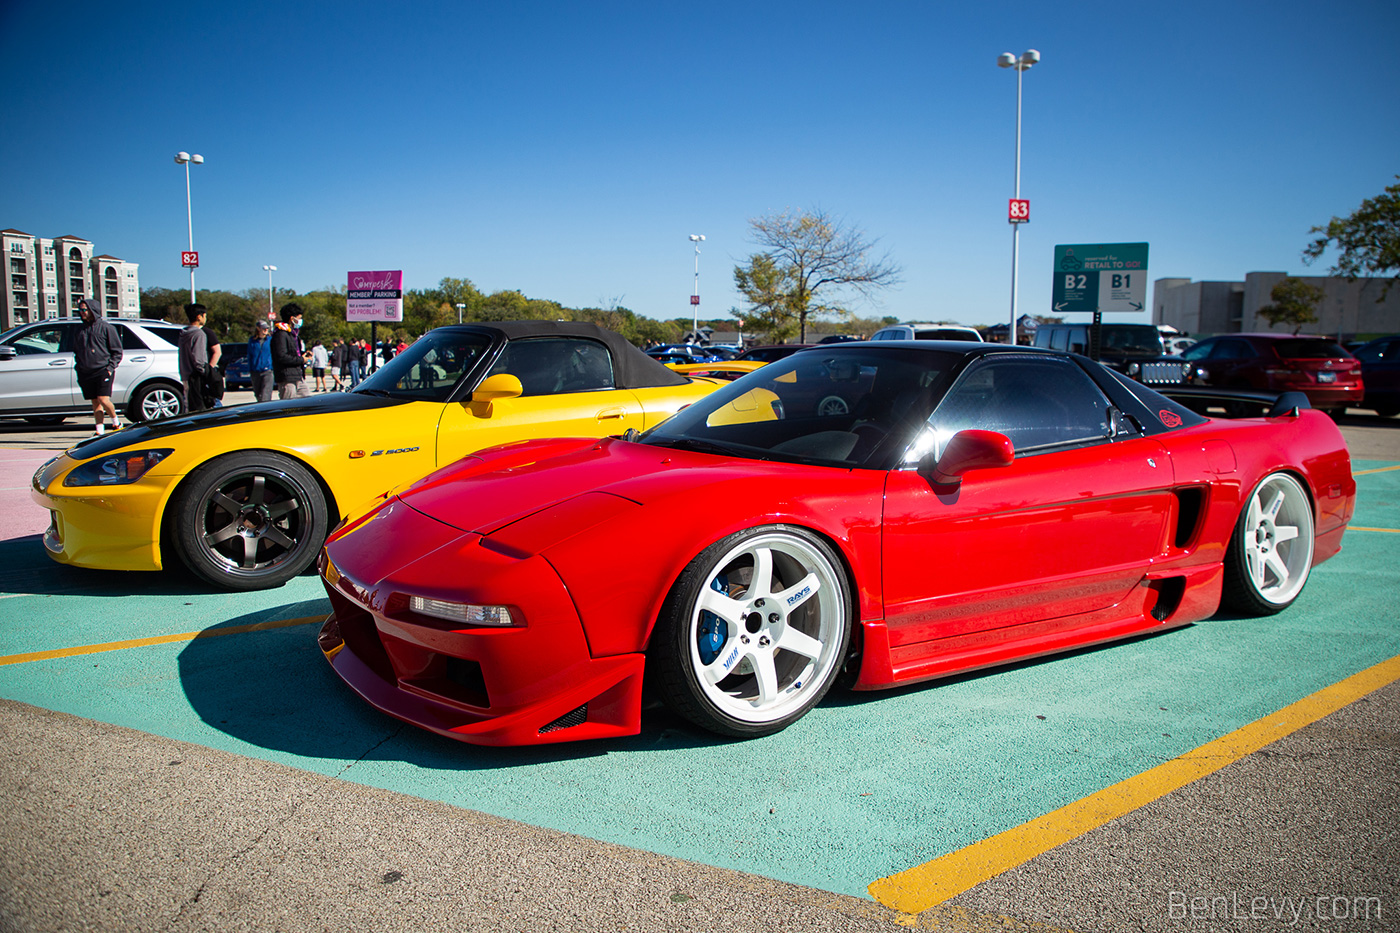 S2000 and NSX at Mall Parking lot